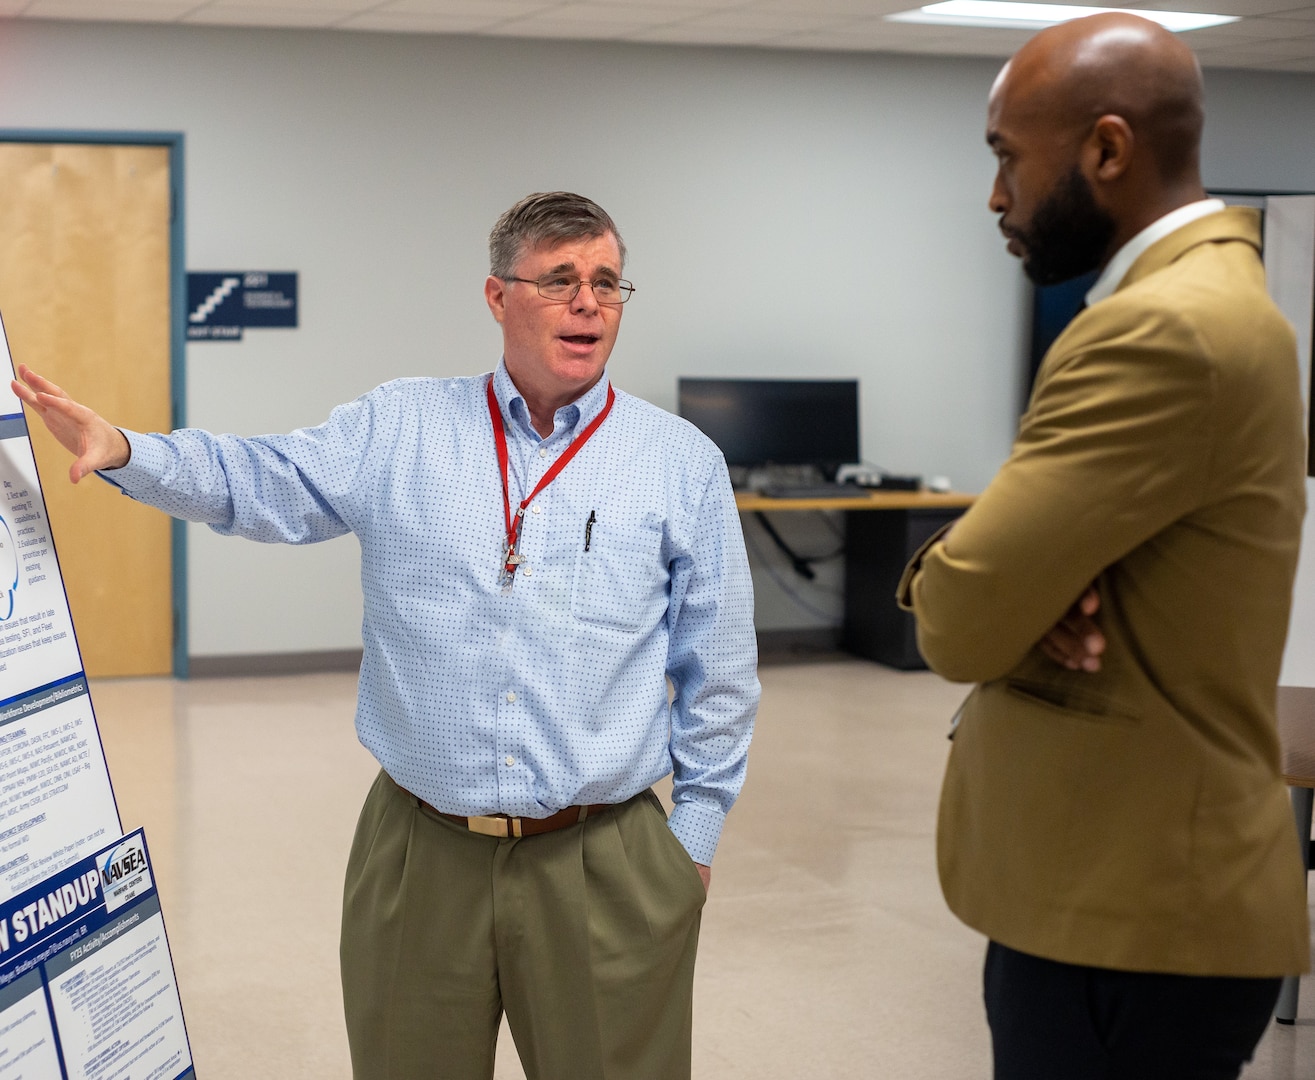 NSWC Crane celebrates 2023 NISE science and technology in annual End of Year Showcase